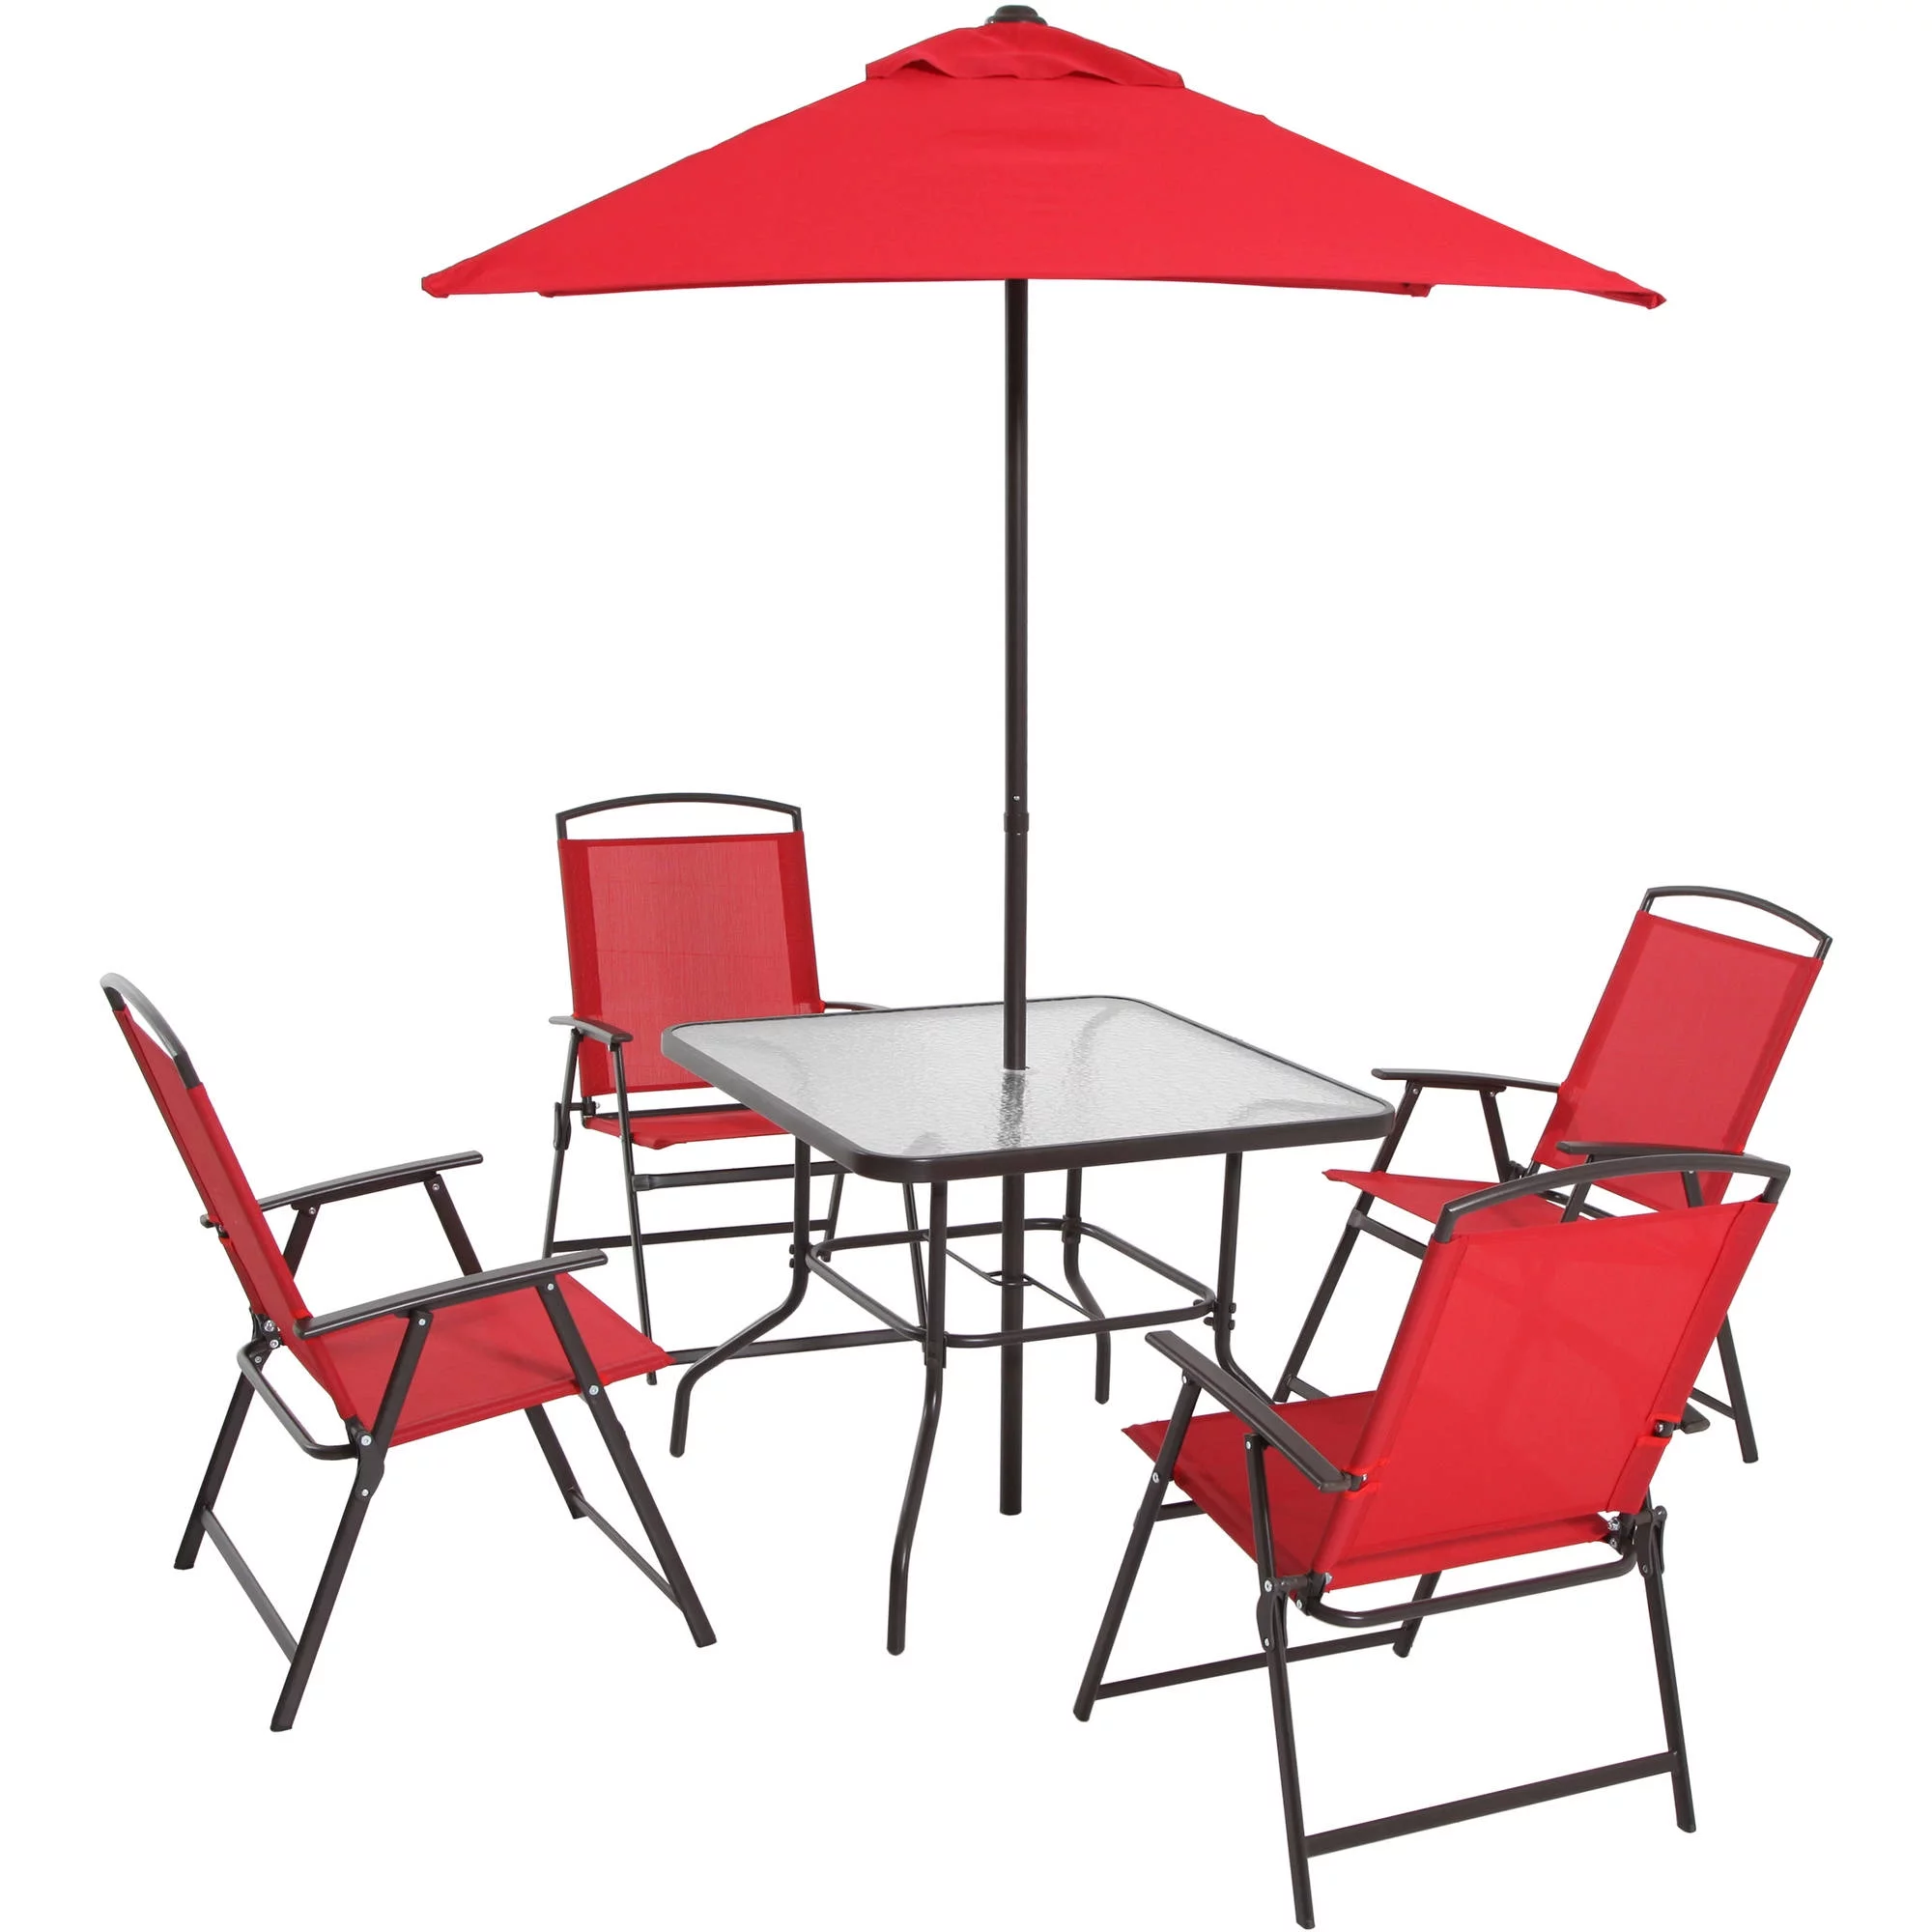 Mainstays Albany Lane Steel Outdoor Patio Dining Set of 6, Red